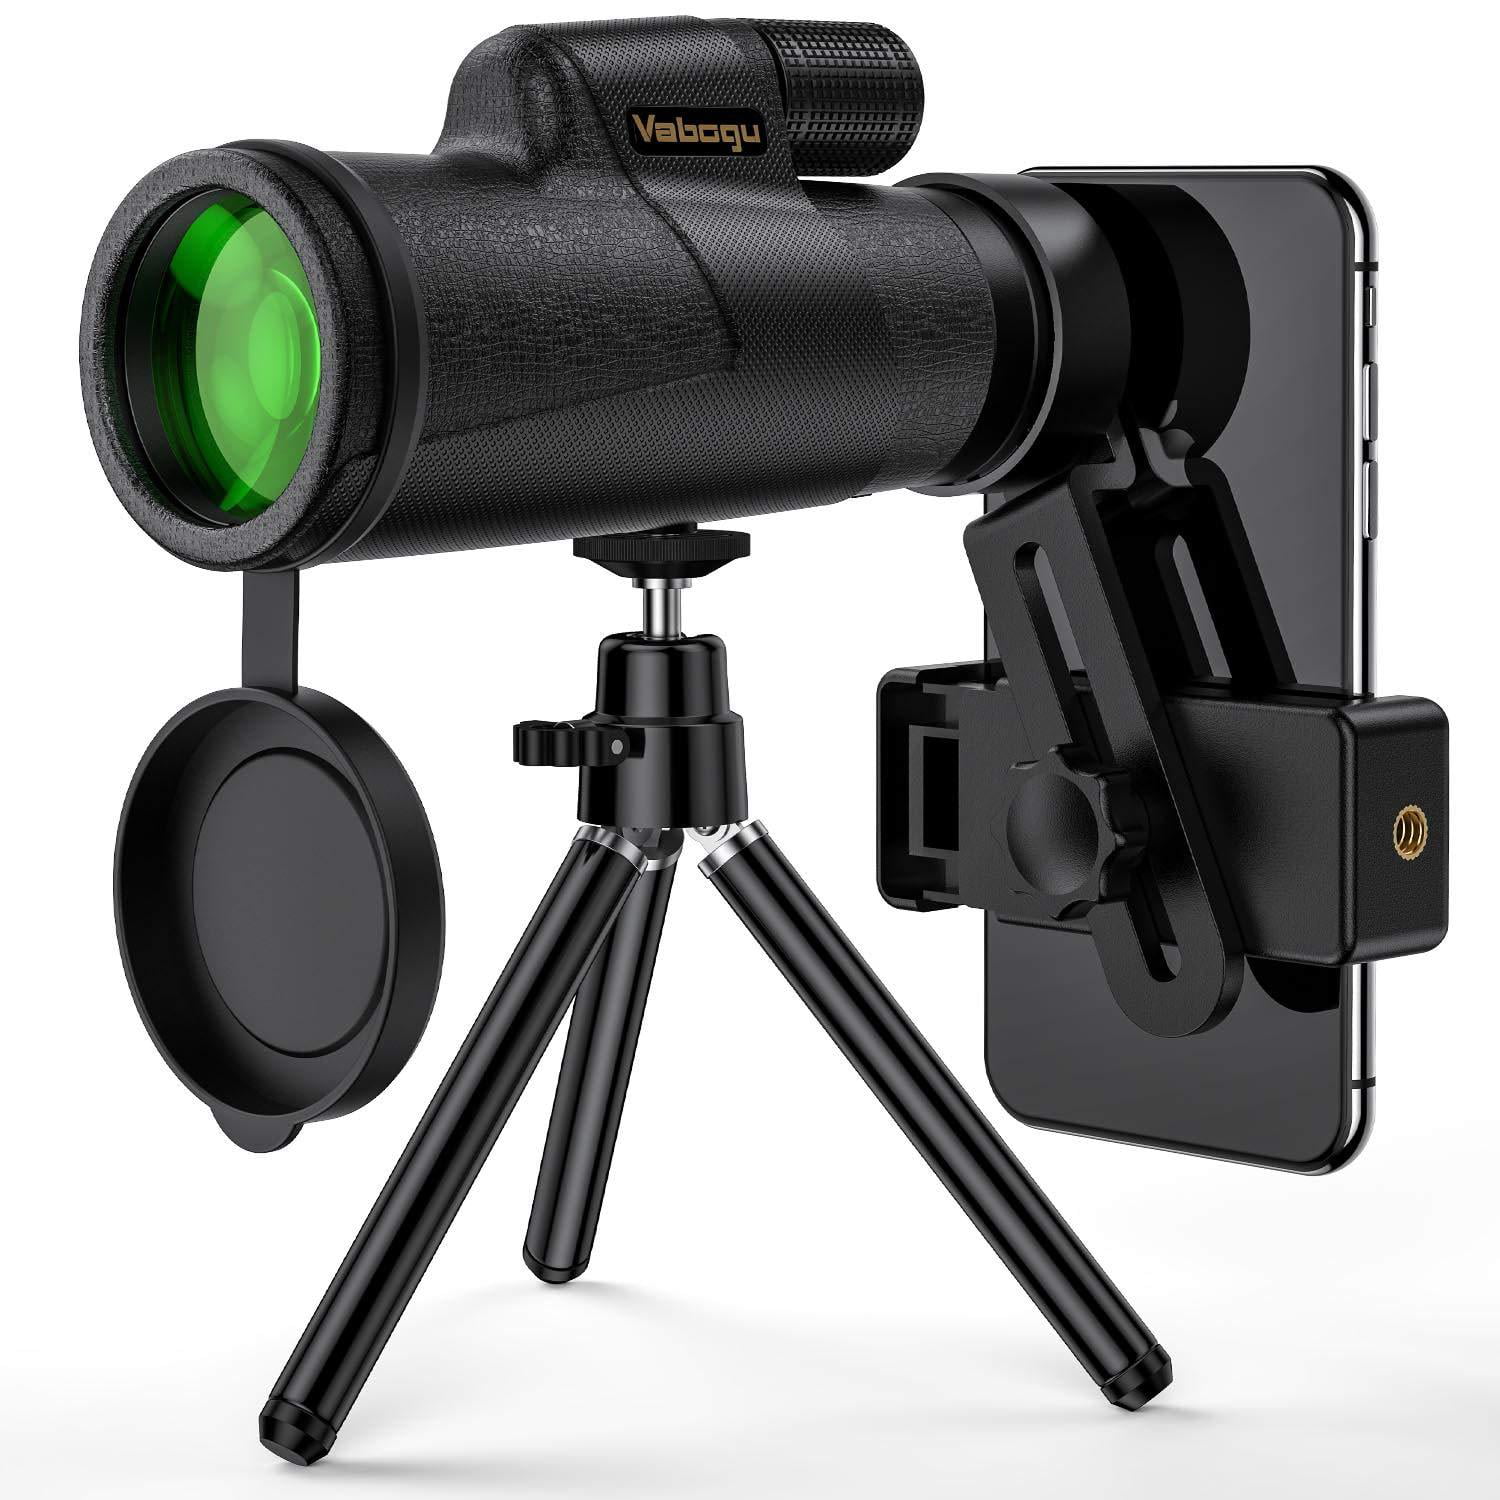 BAK4 Prism Monocular for Adults Kids for Bird Watching/Hunting/Camping/Hiking/Travelling/Wildlife 12X50 Monocular Telescope Waterproof Monocular for Smartphone with Monocular Case Holder&Tripod 